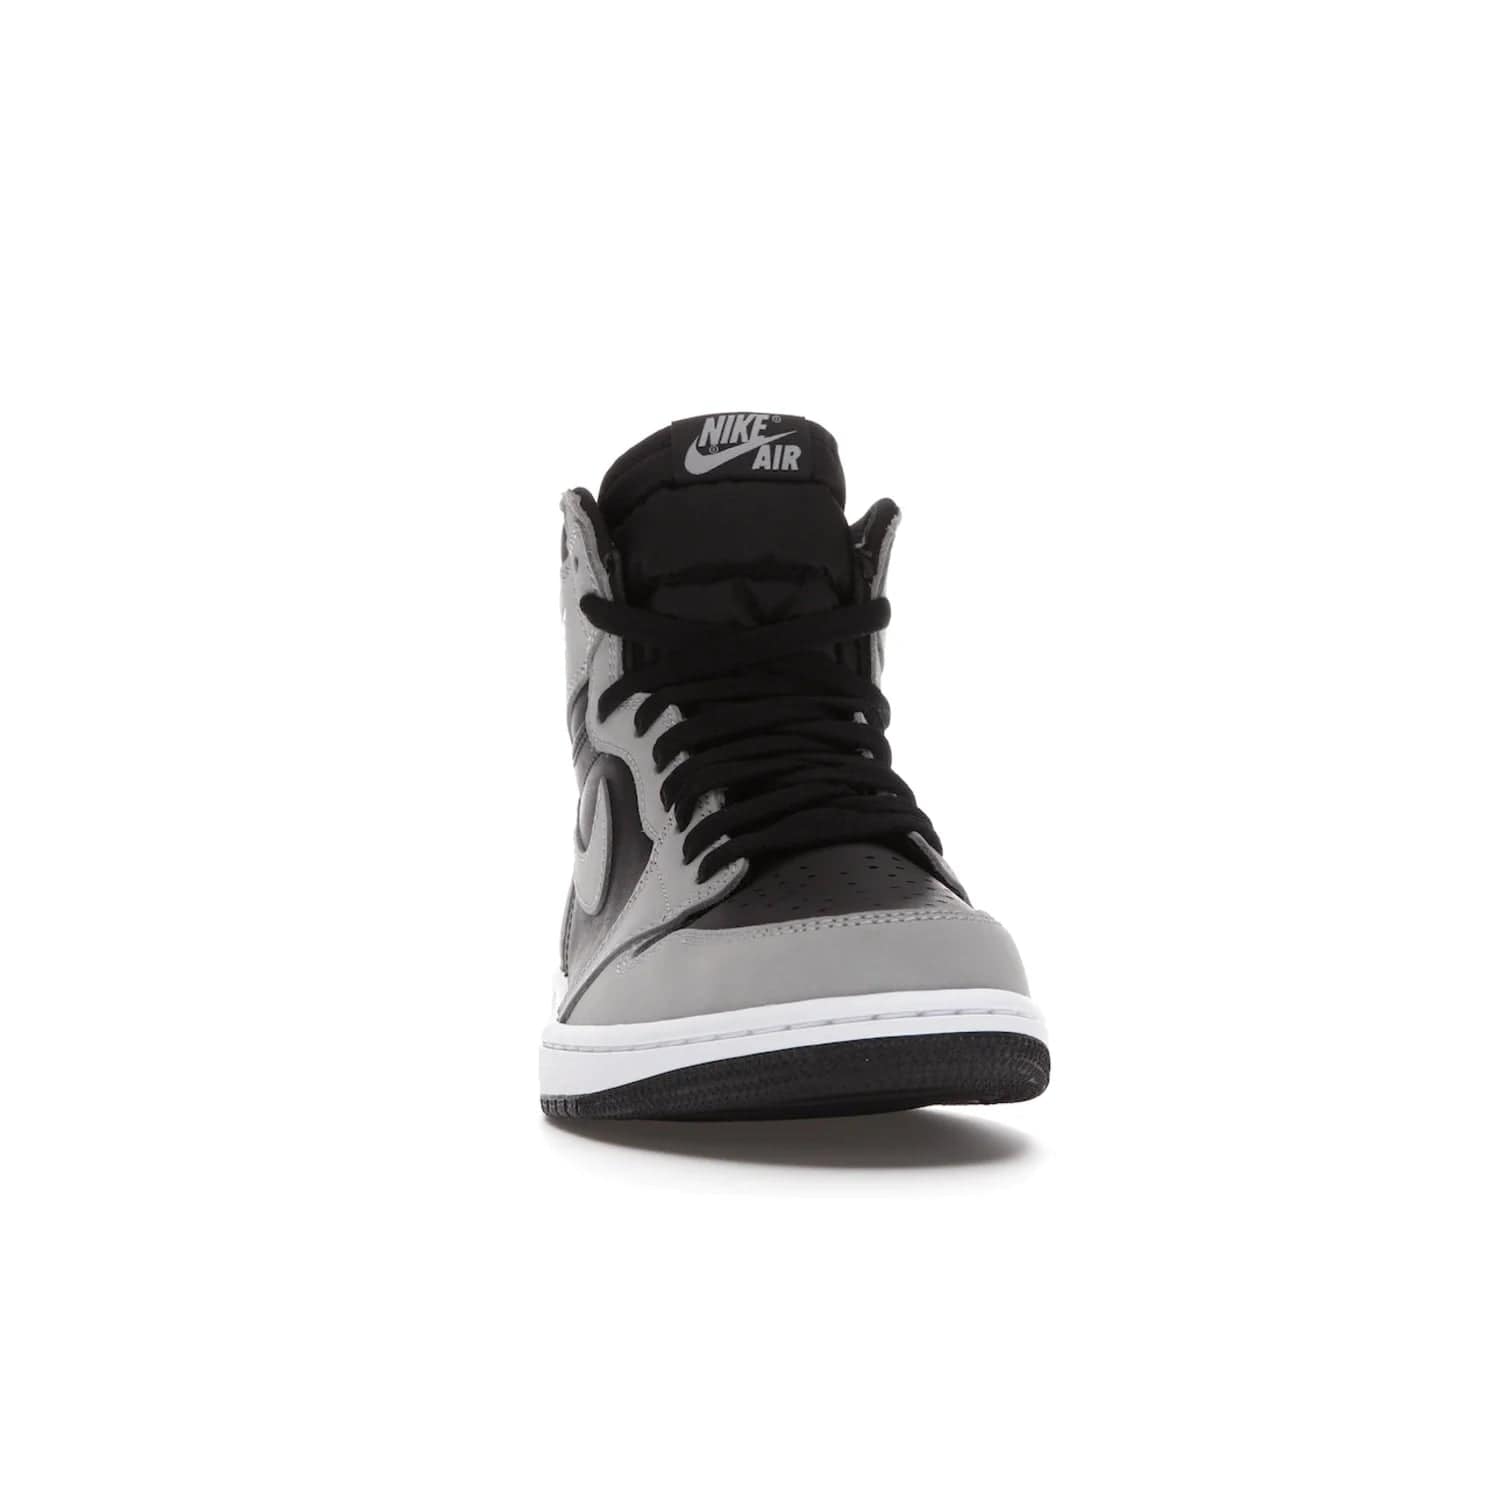 Jordan 1 Retro High Shadow 2.0 - Image 9 - Only at www.BallersClubKickz.com - #
Classic Air Jordan 1 Retro High Shadow 2.0 with black leather base and Light Smoke Grey overlays. Released in May 2021.